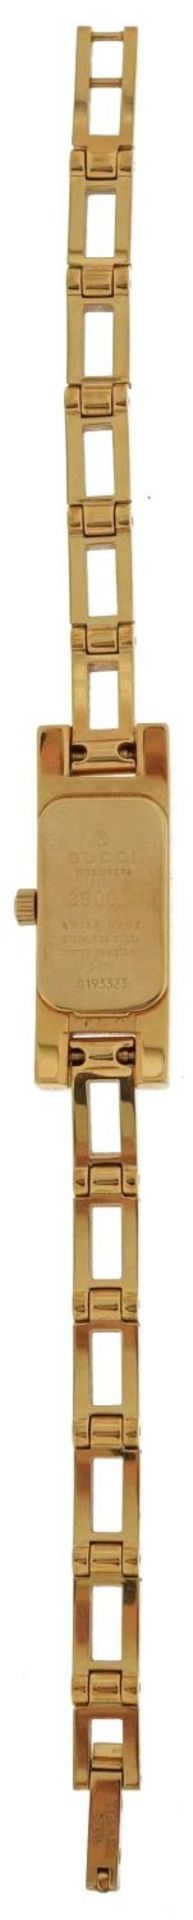 Gucci, ladies gold plated Gucci 3900L wristwatch, serial number 0193323, the case 12mm wide - Image 3 of 6